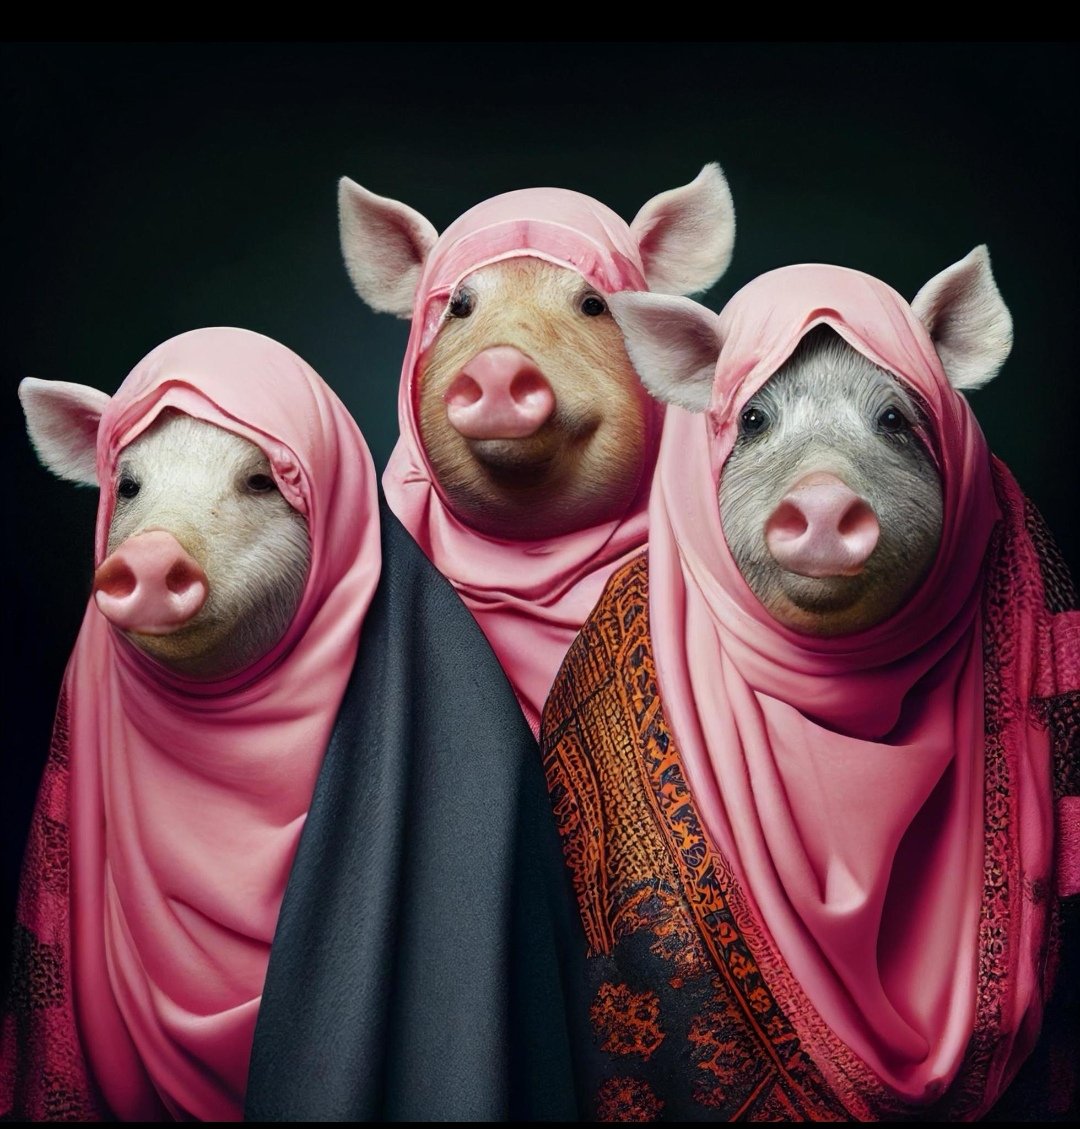 @TheIndMuslim #saveanimals
We are not sows, we are a Mujeet's cousin - wives. 👇